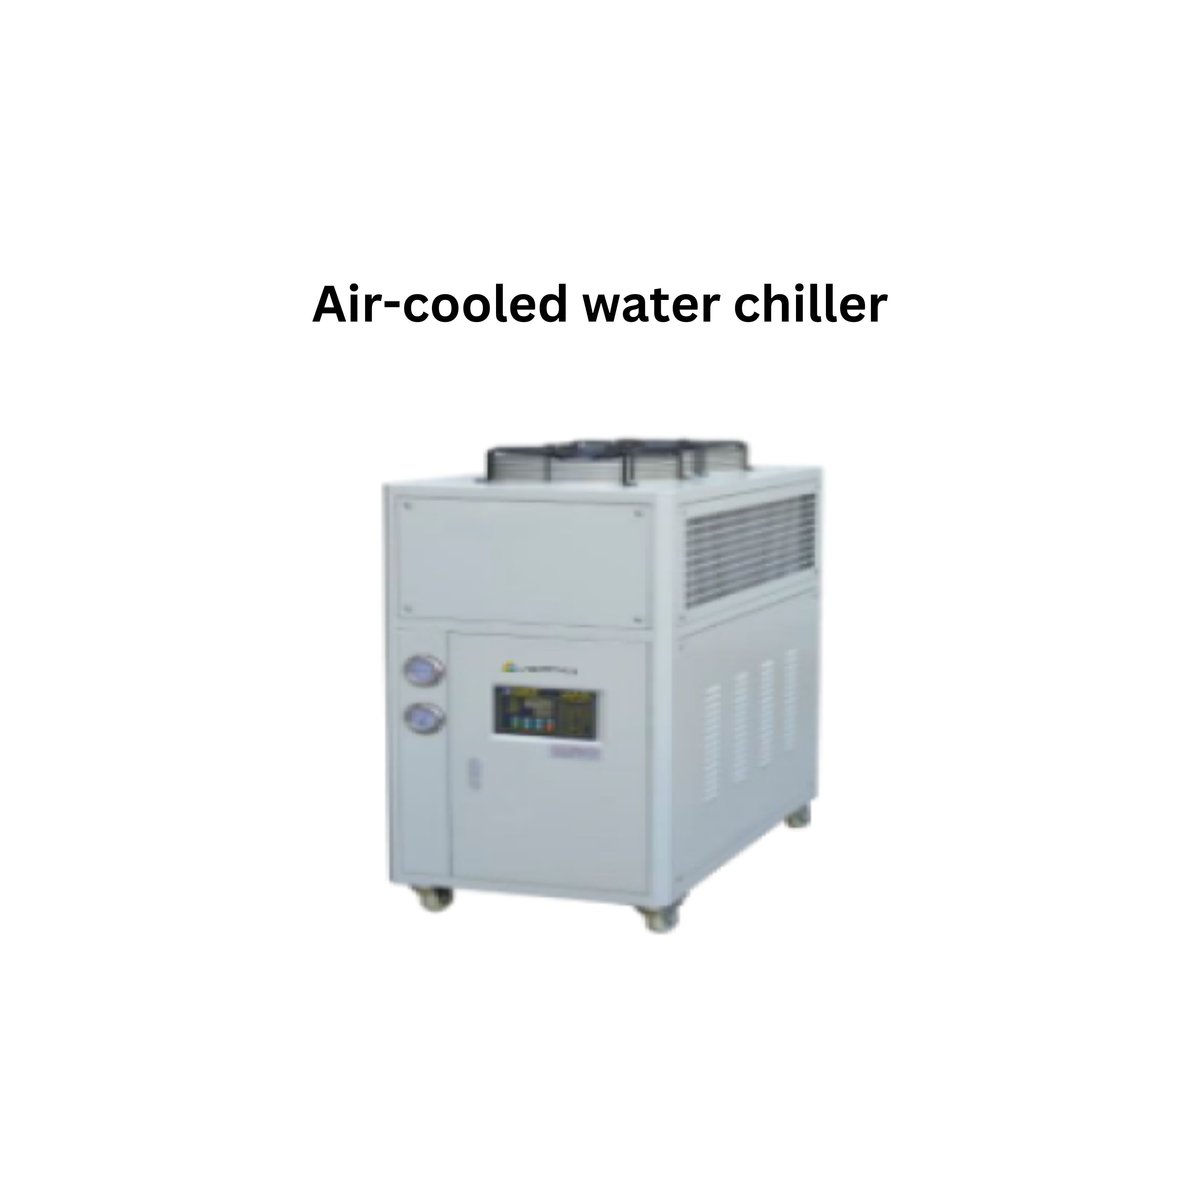 Air-cooled water chiller.jpg